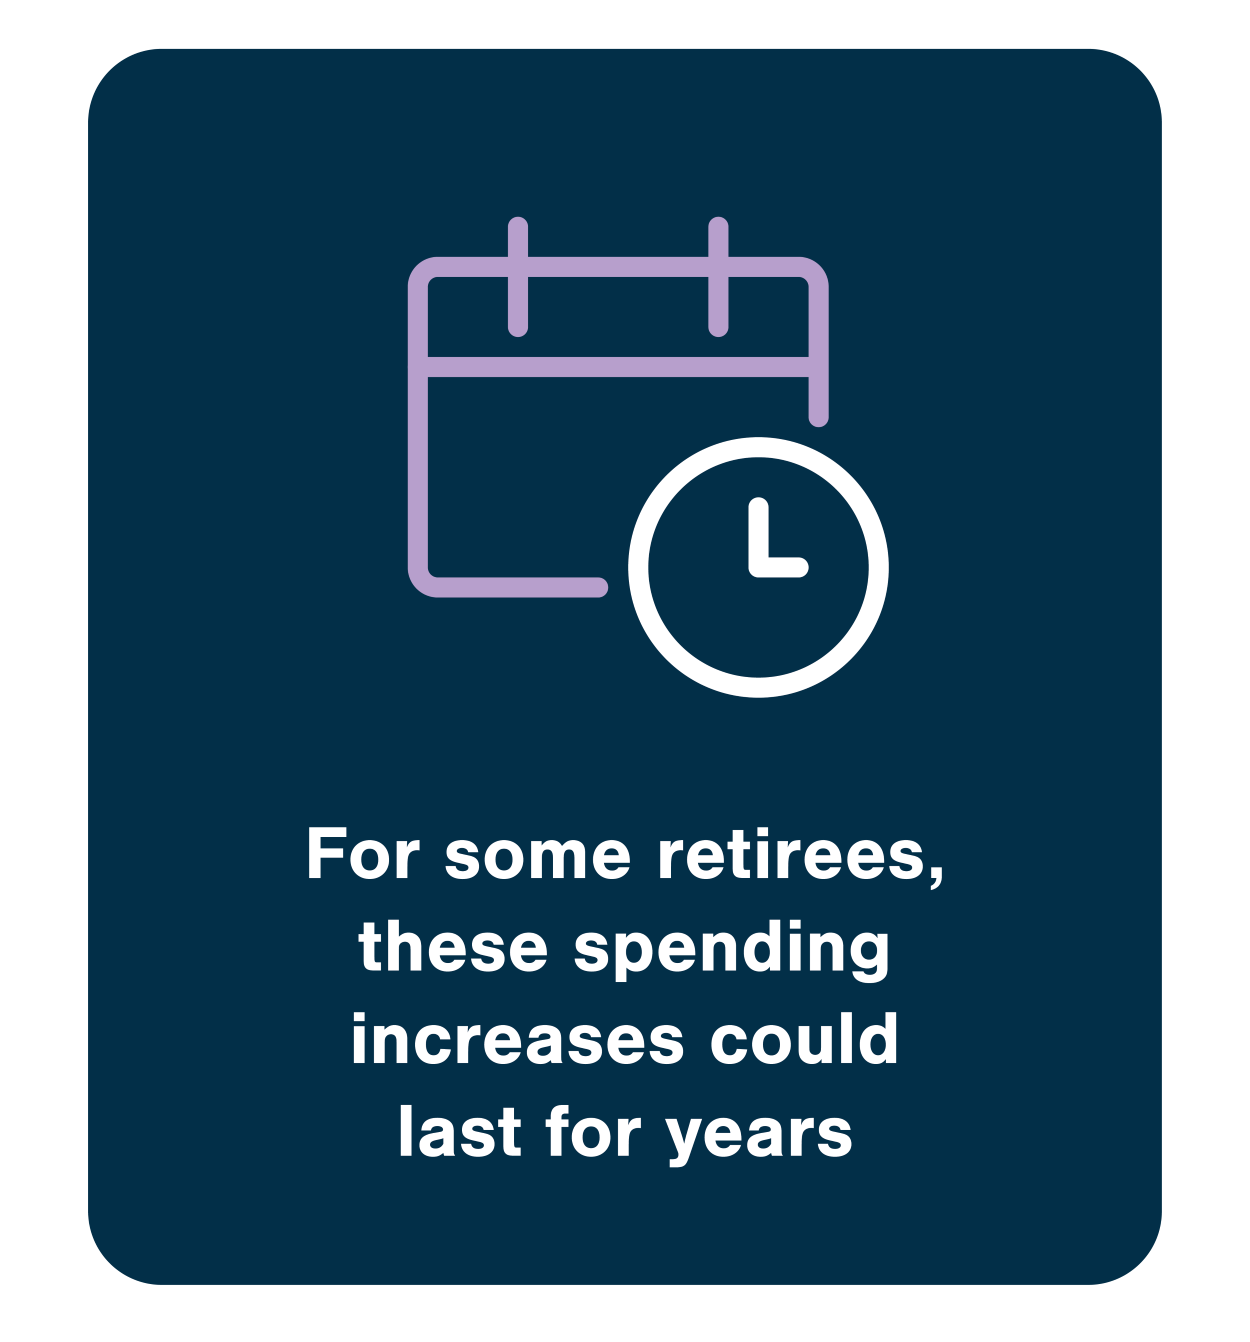 For some retirees, these spending increases could last years.